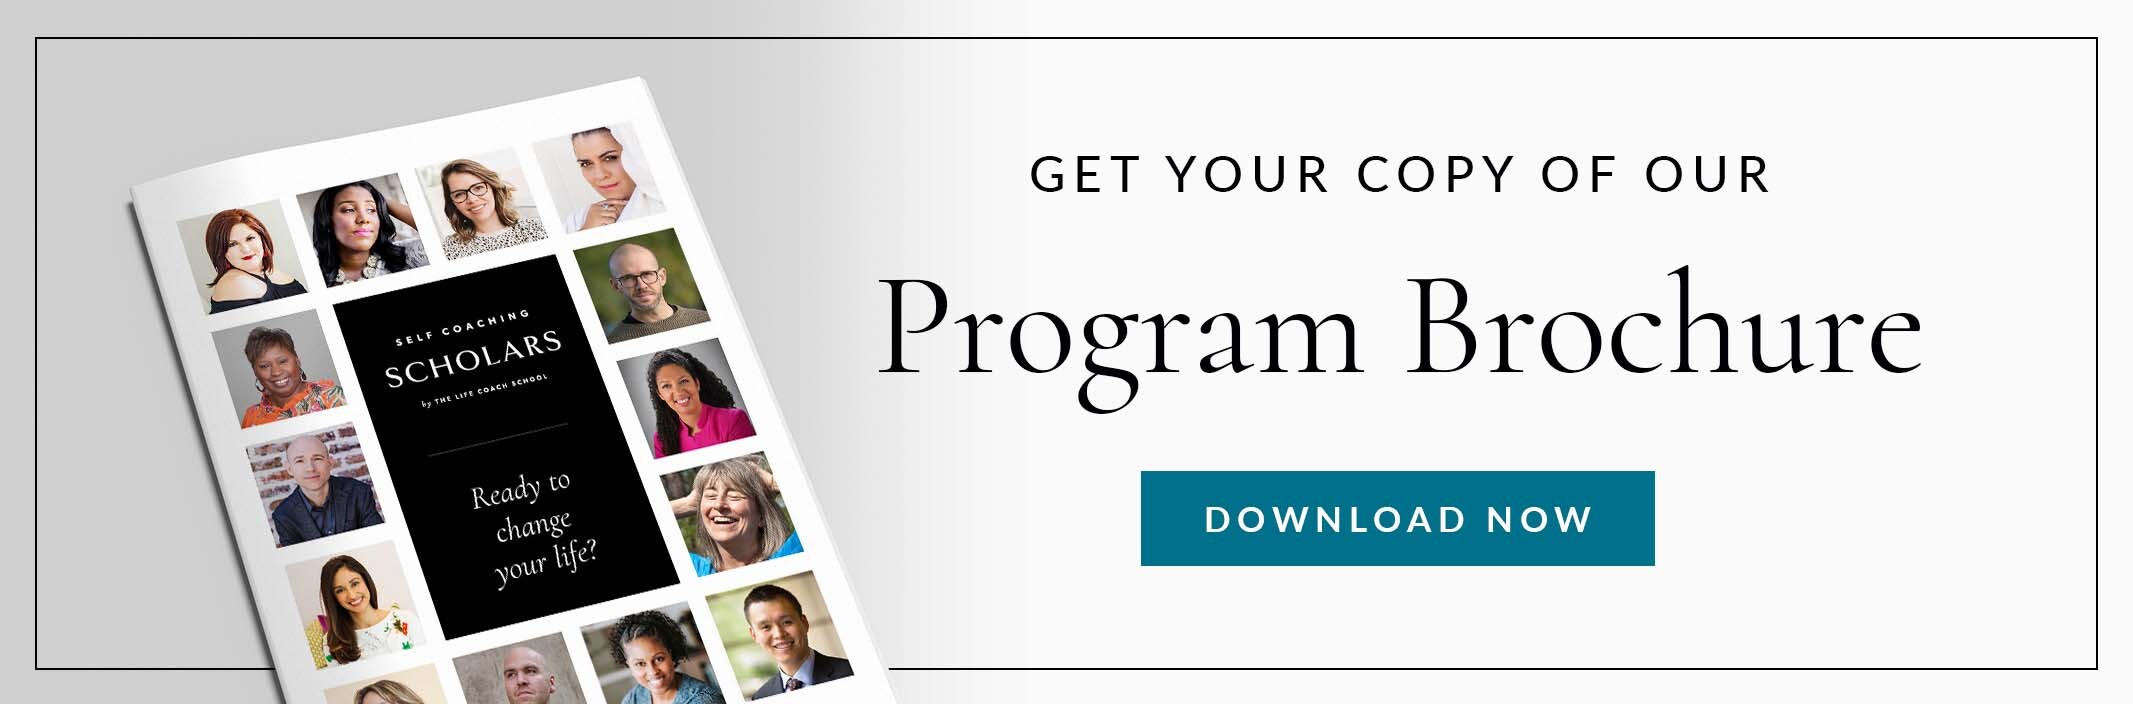 Get a copy of our Program Brochure - Download Now